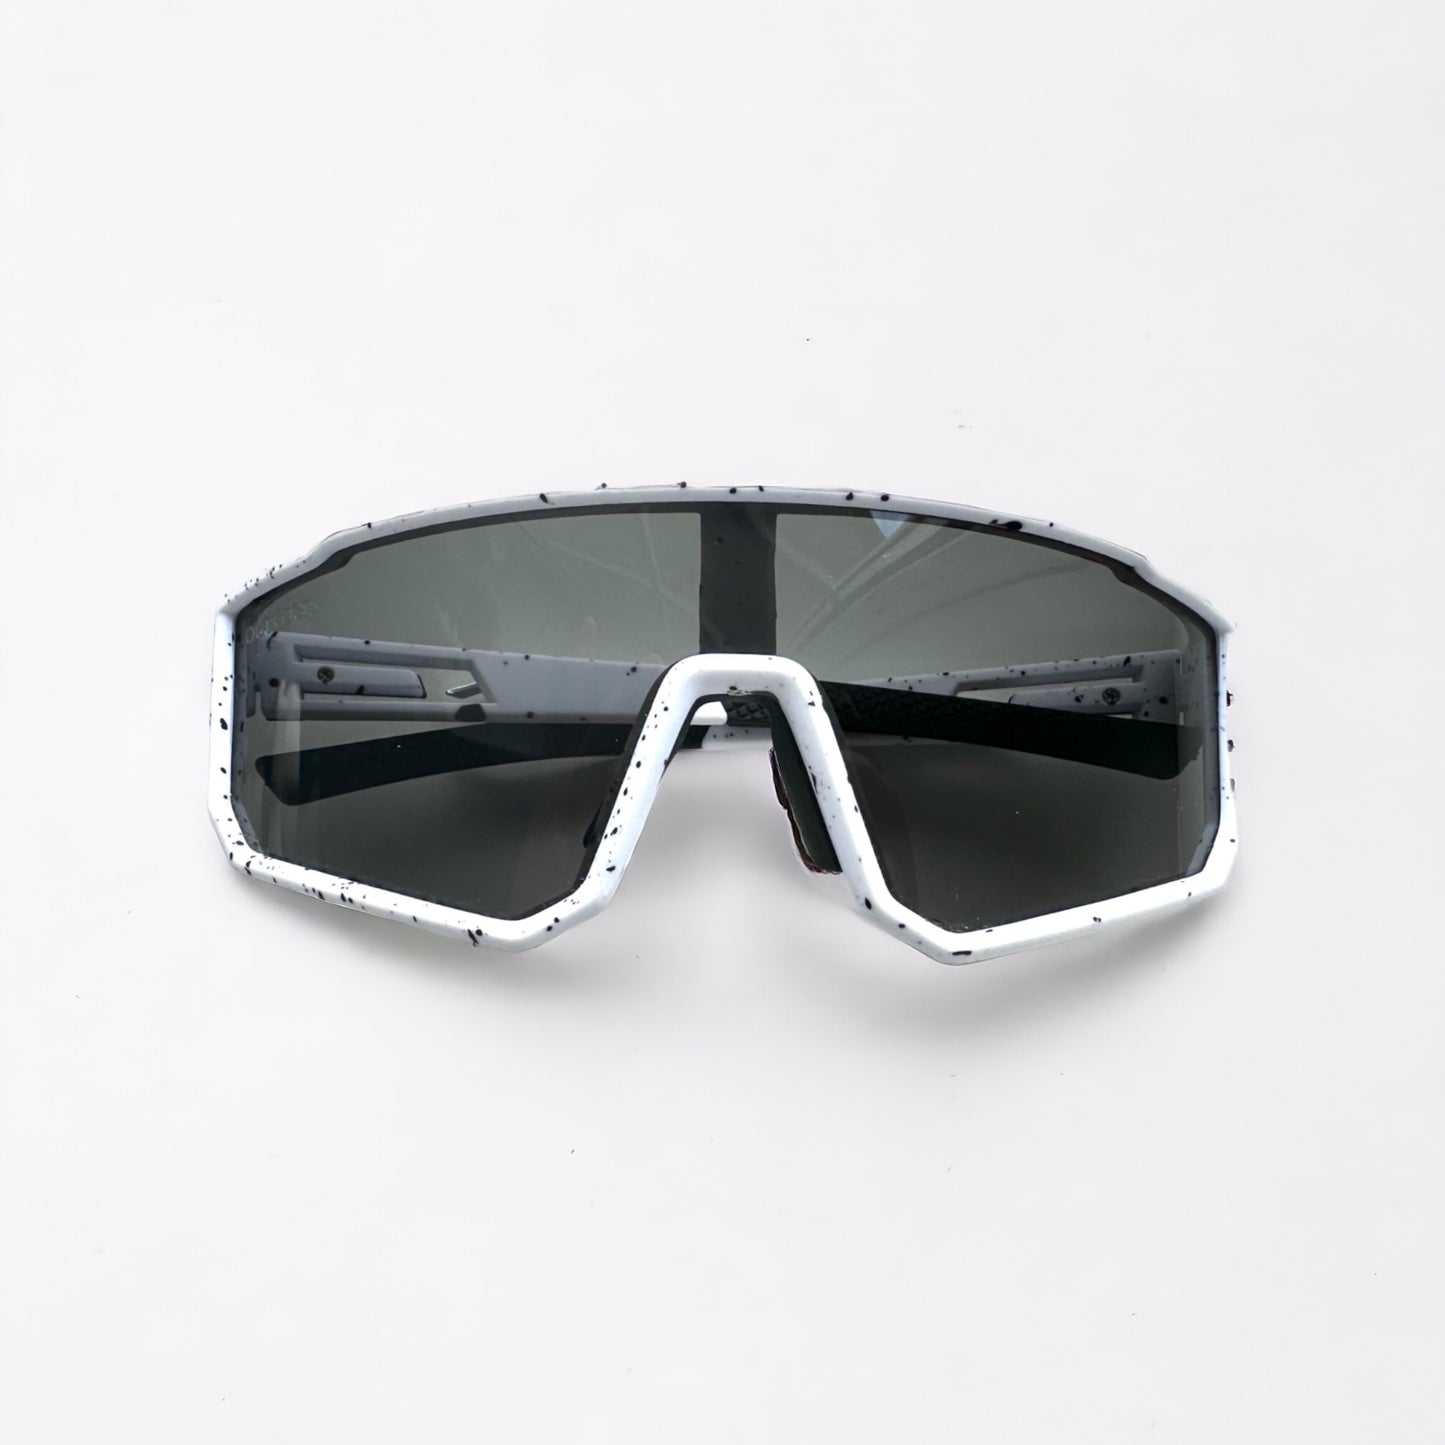 Outsiders Spaced Sunglasses - White Speckle